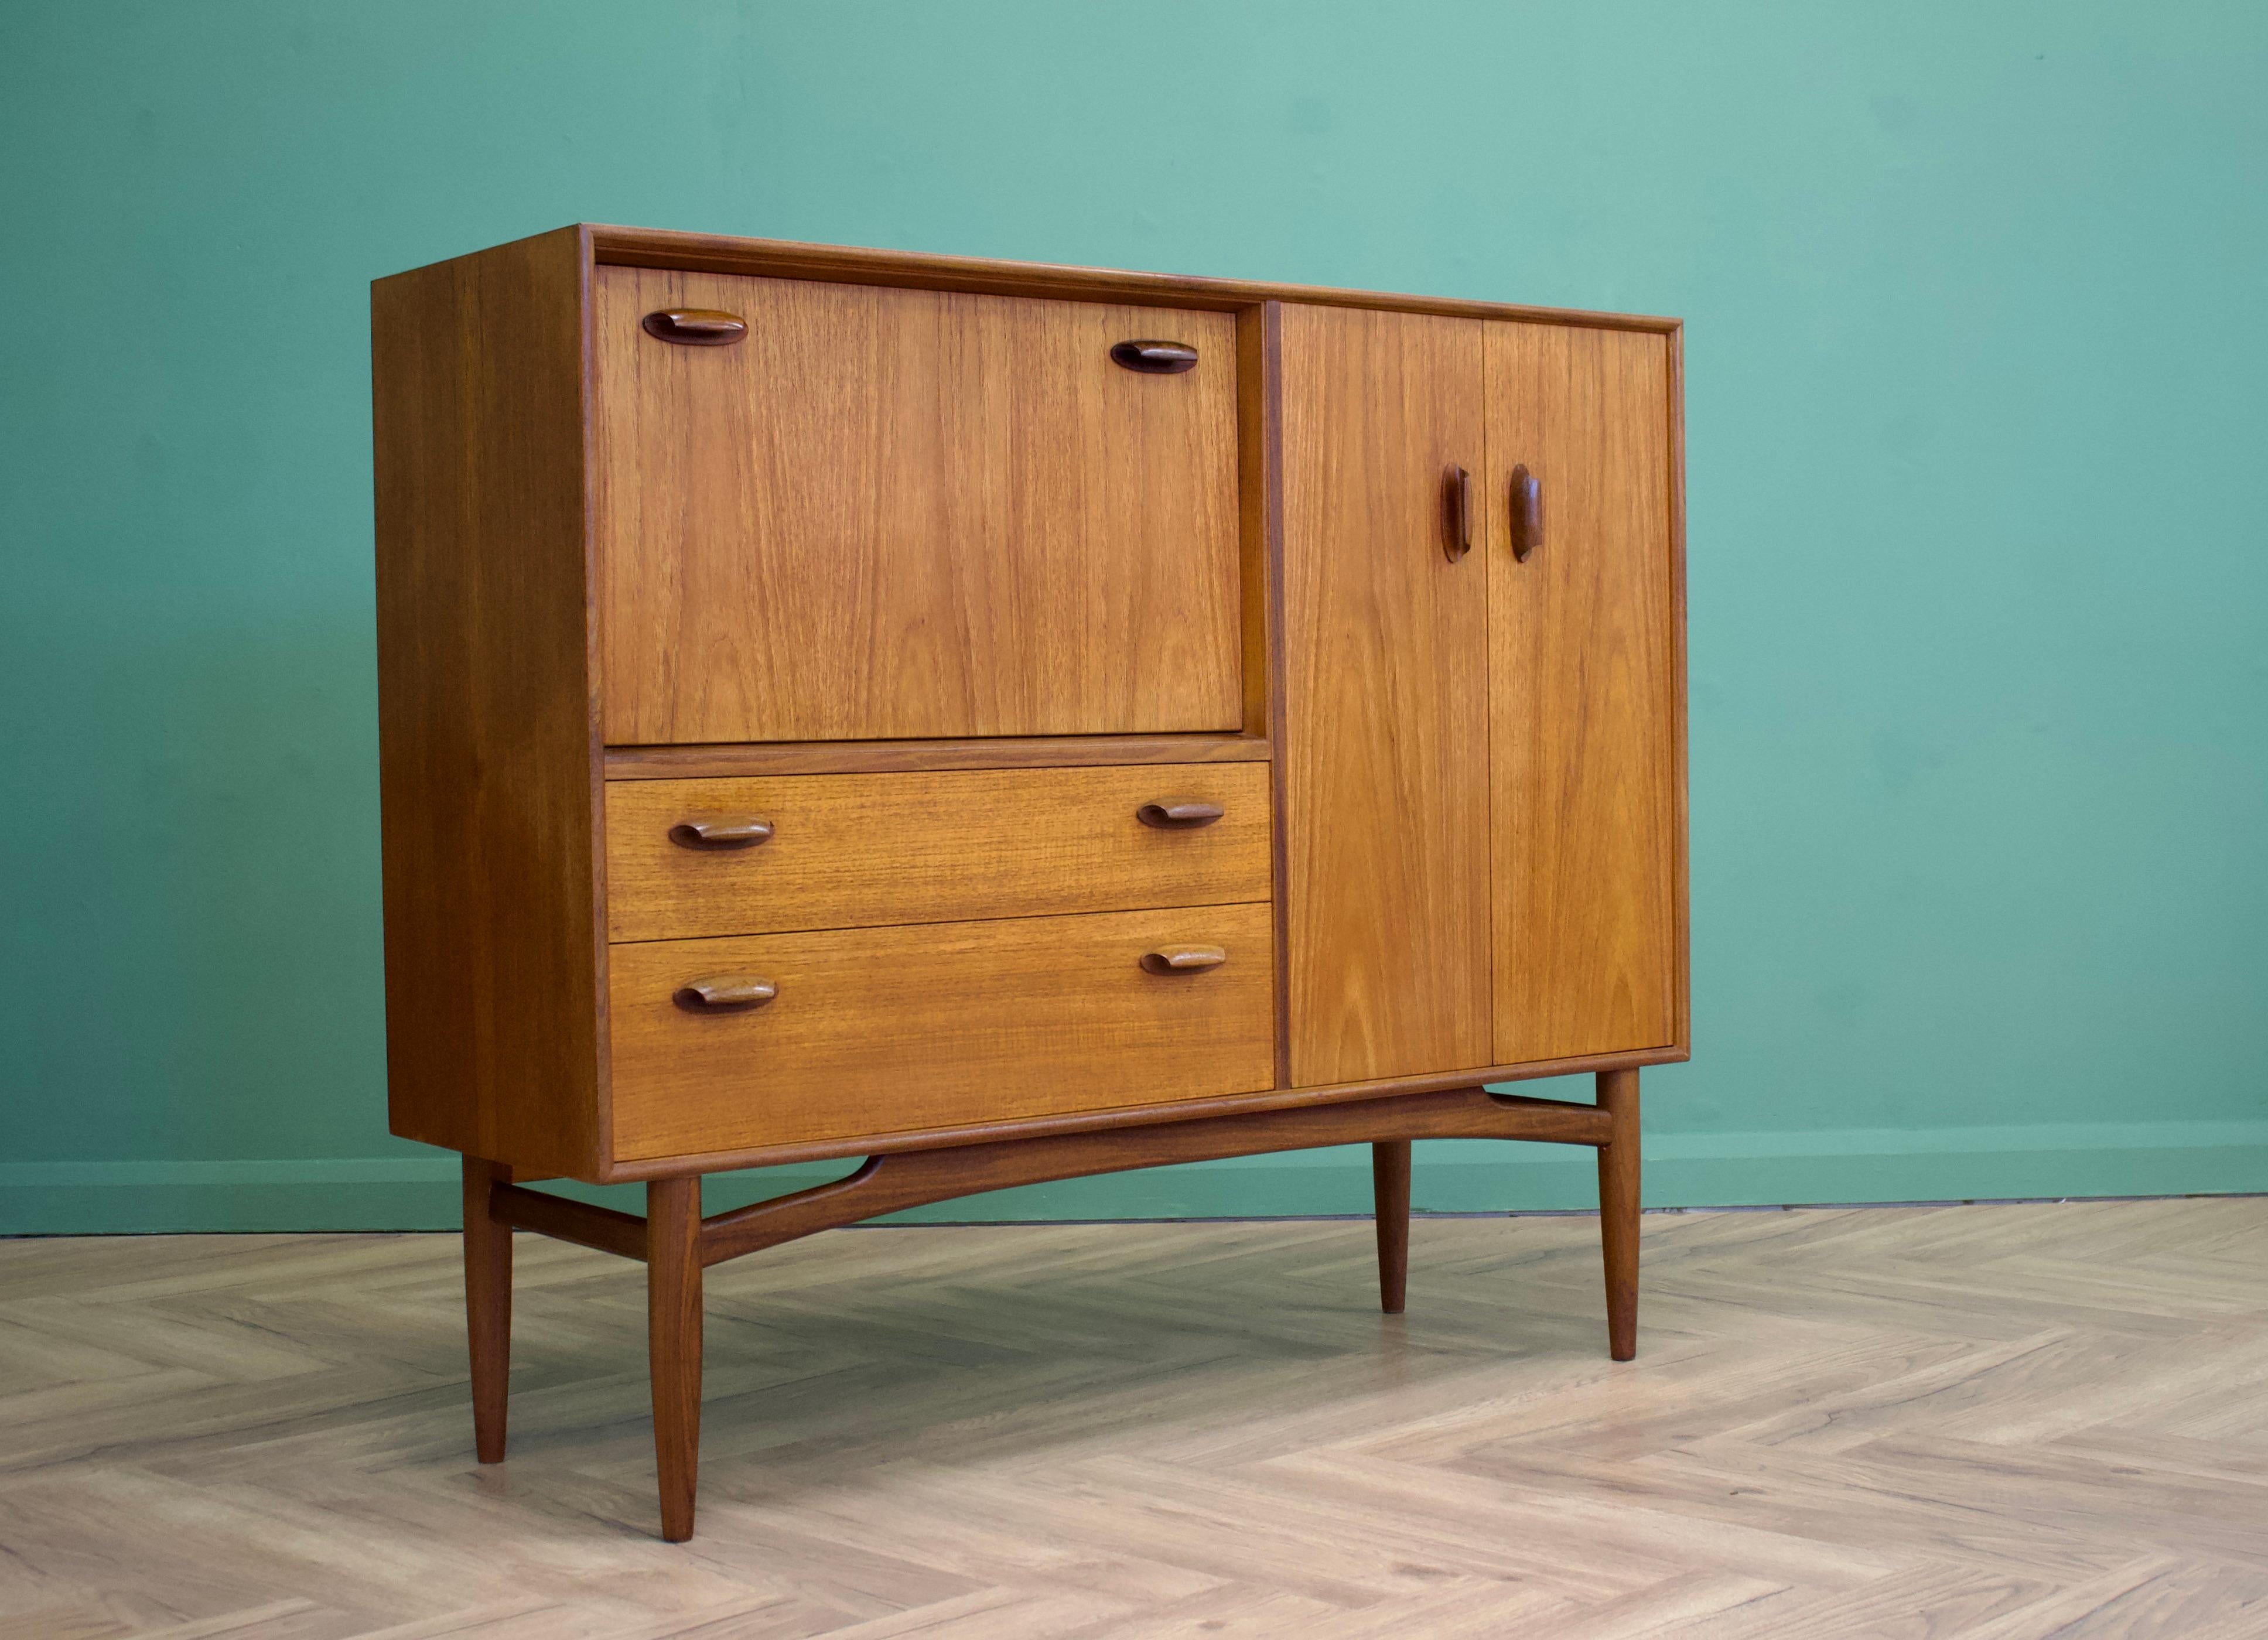 - Mid century drinks cabinet / dry bar / sideboard.
- Manufactured in the UK by G Plan.
- Made from teak and teak veneer.